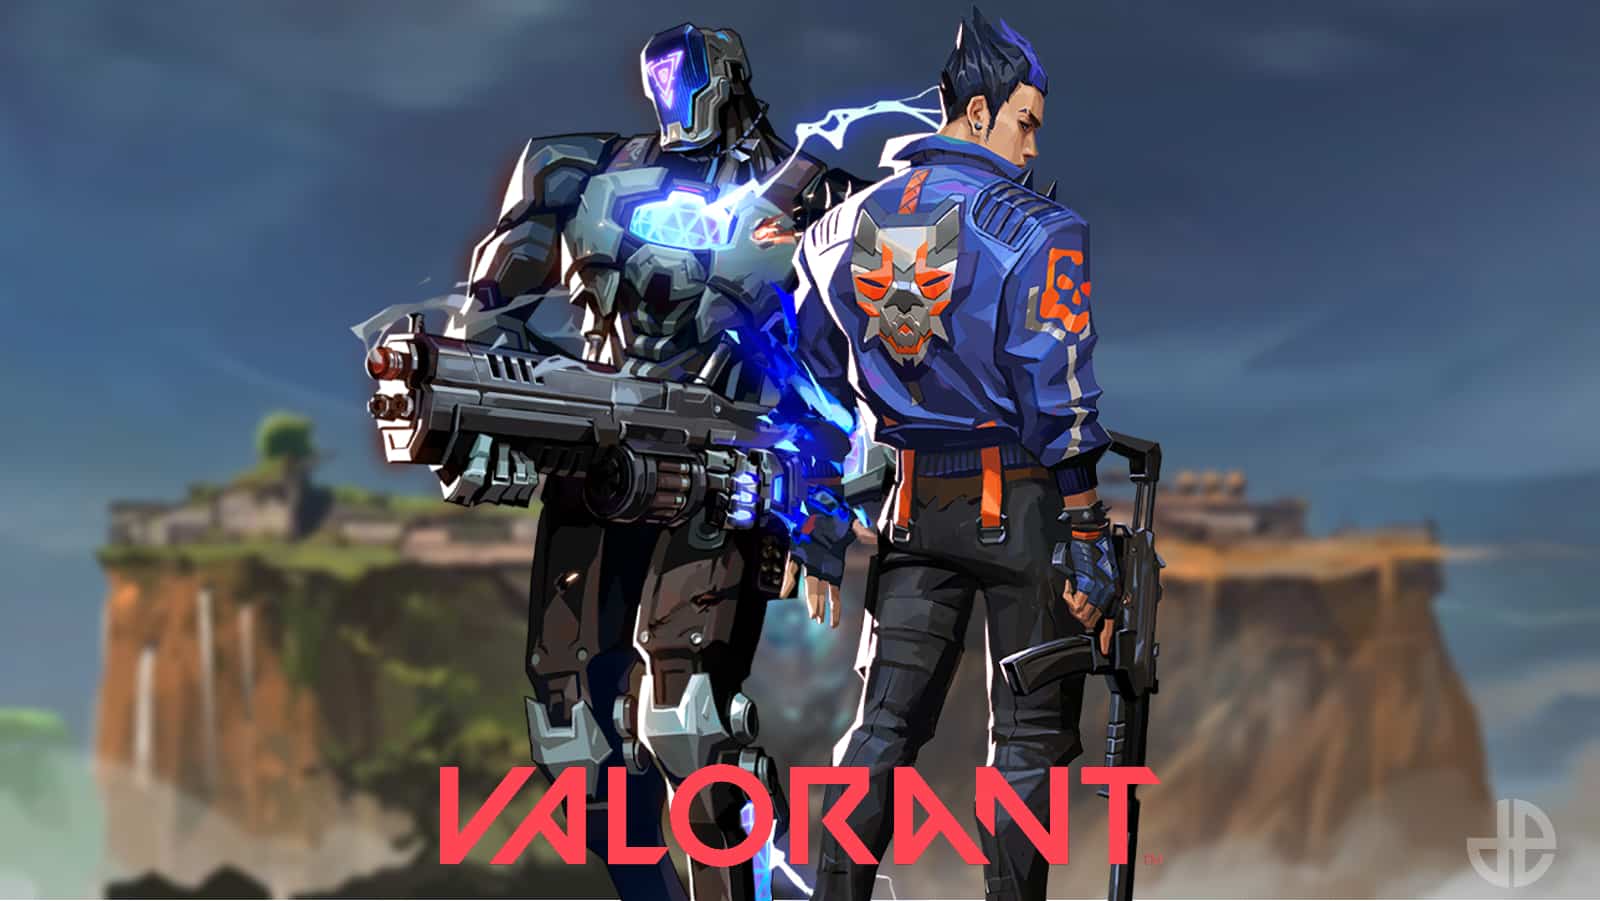 kay/o and yoru stand against fracture background valorant